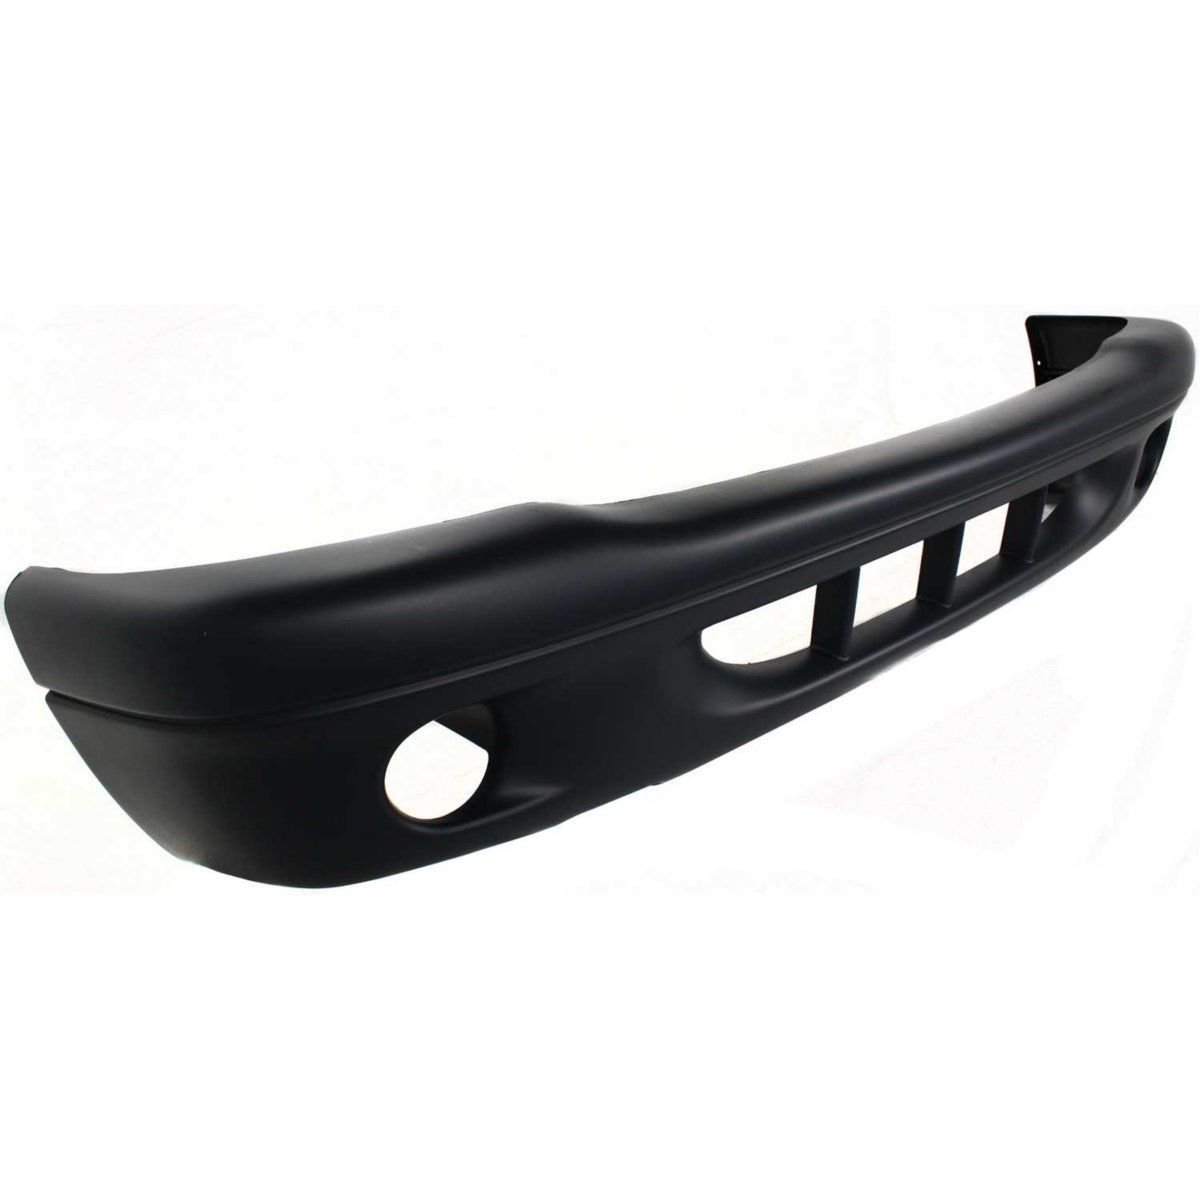 2001-2004 DODGE DAKOTA Front Bumper Cover w/Fog Lamps Painted to Match